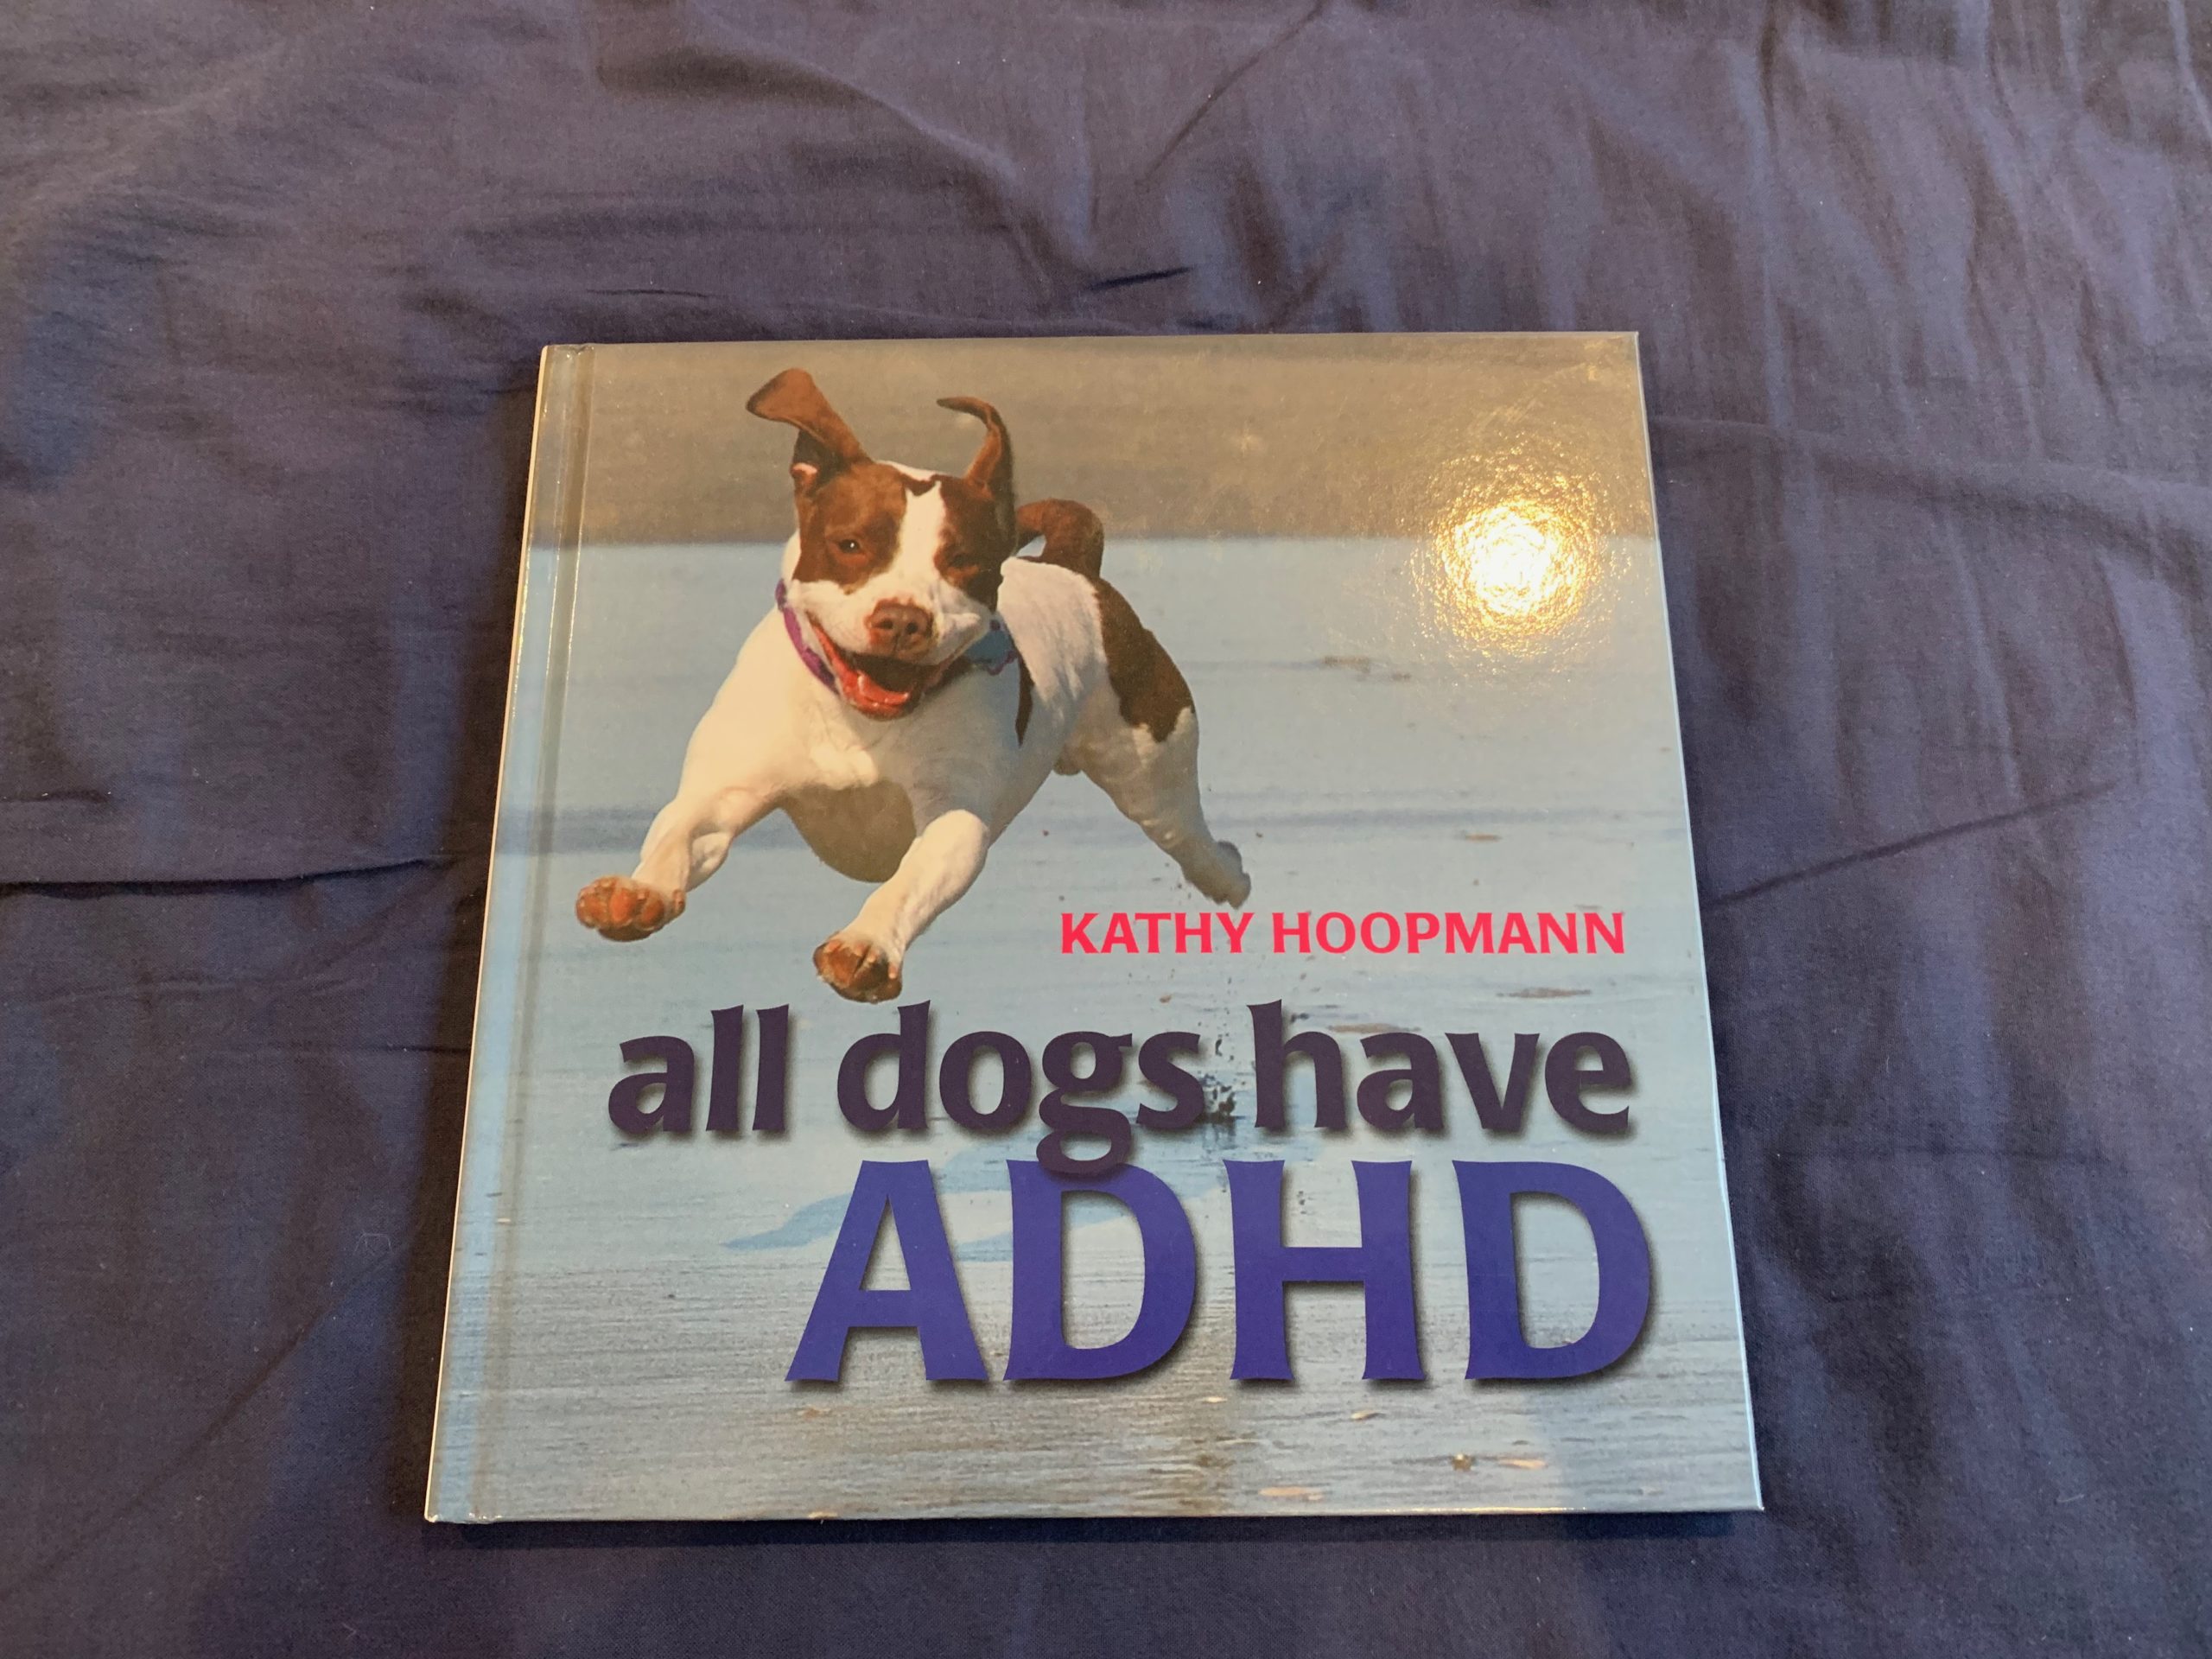 can dogs get adhd or ocd